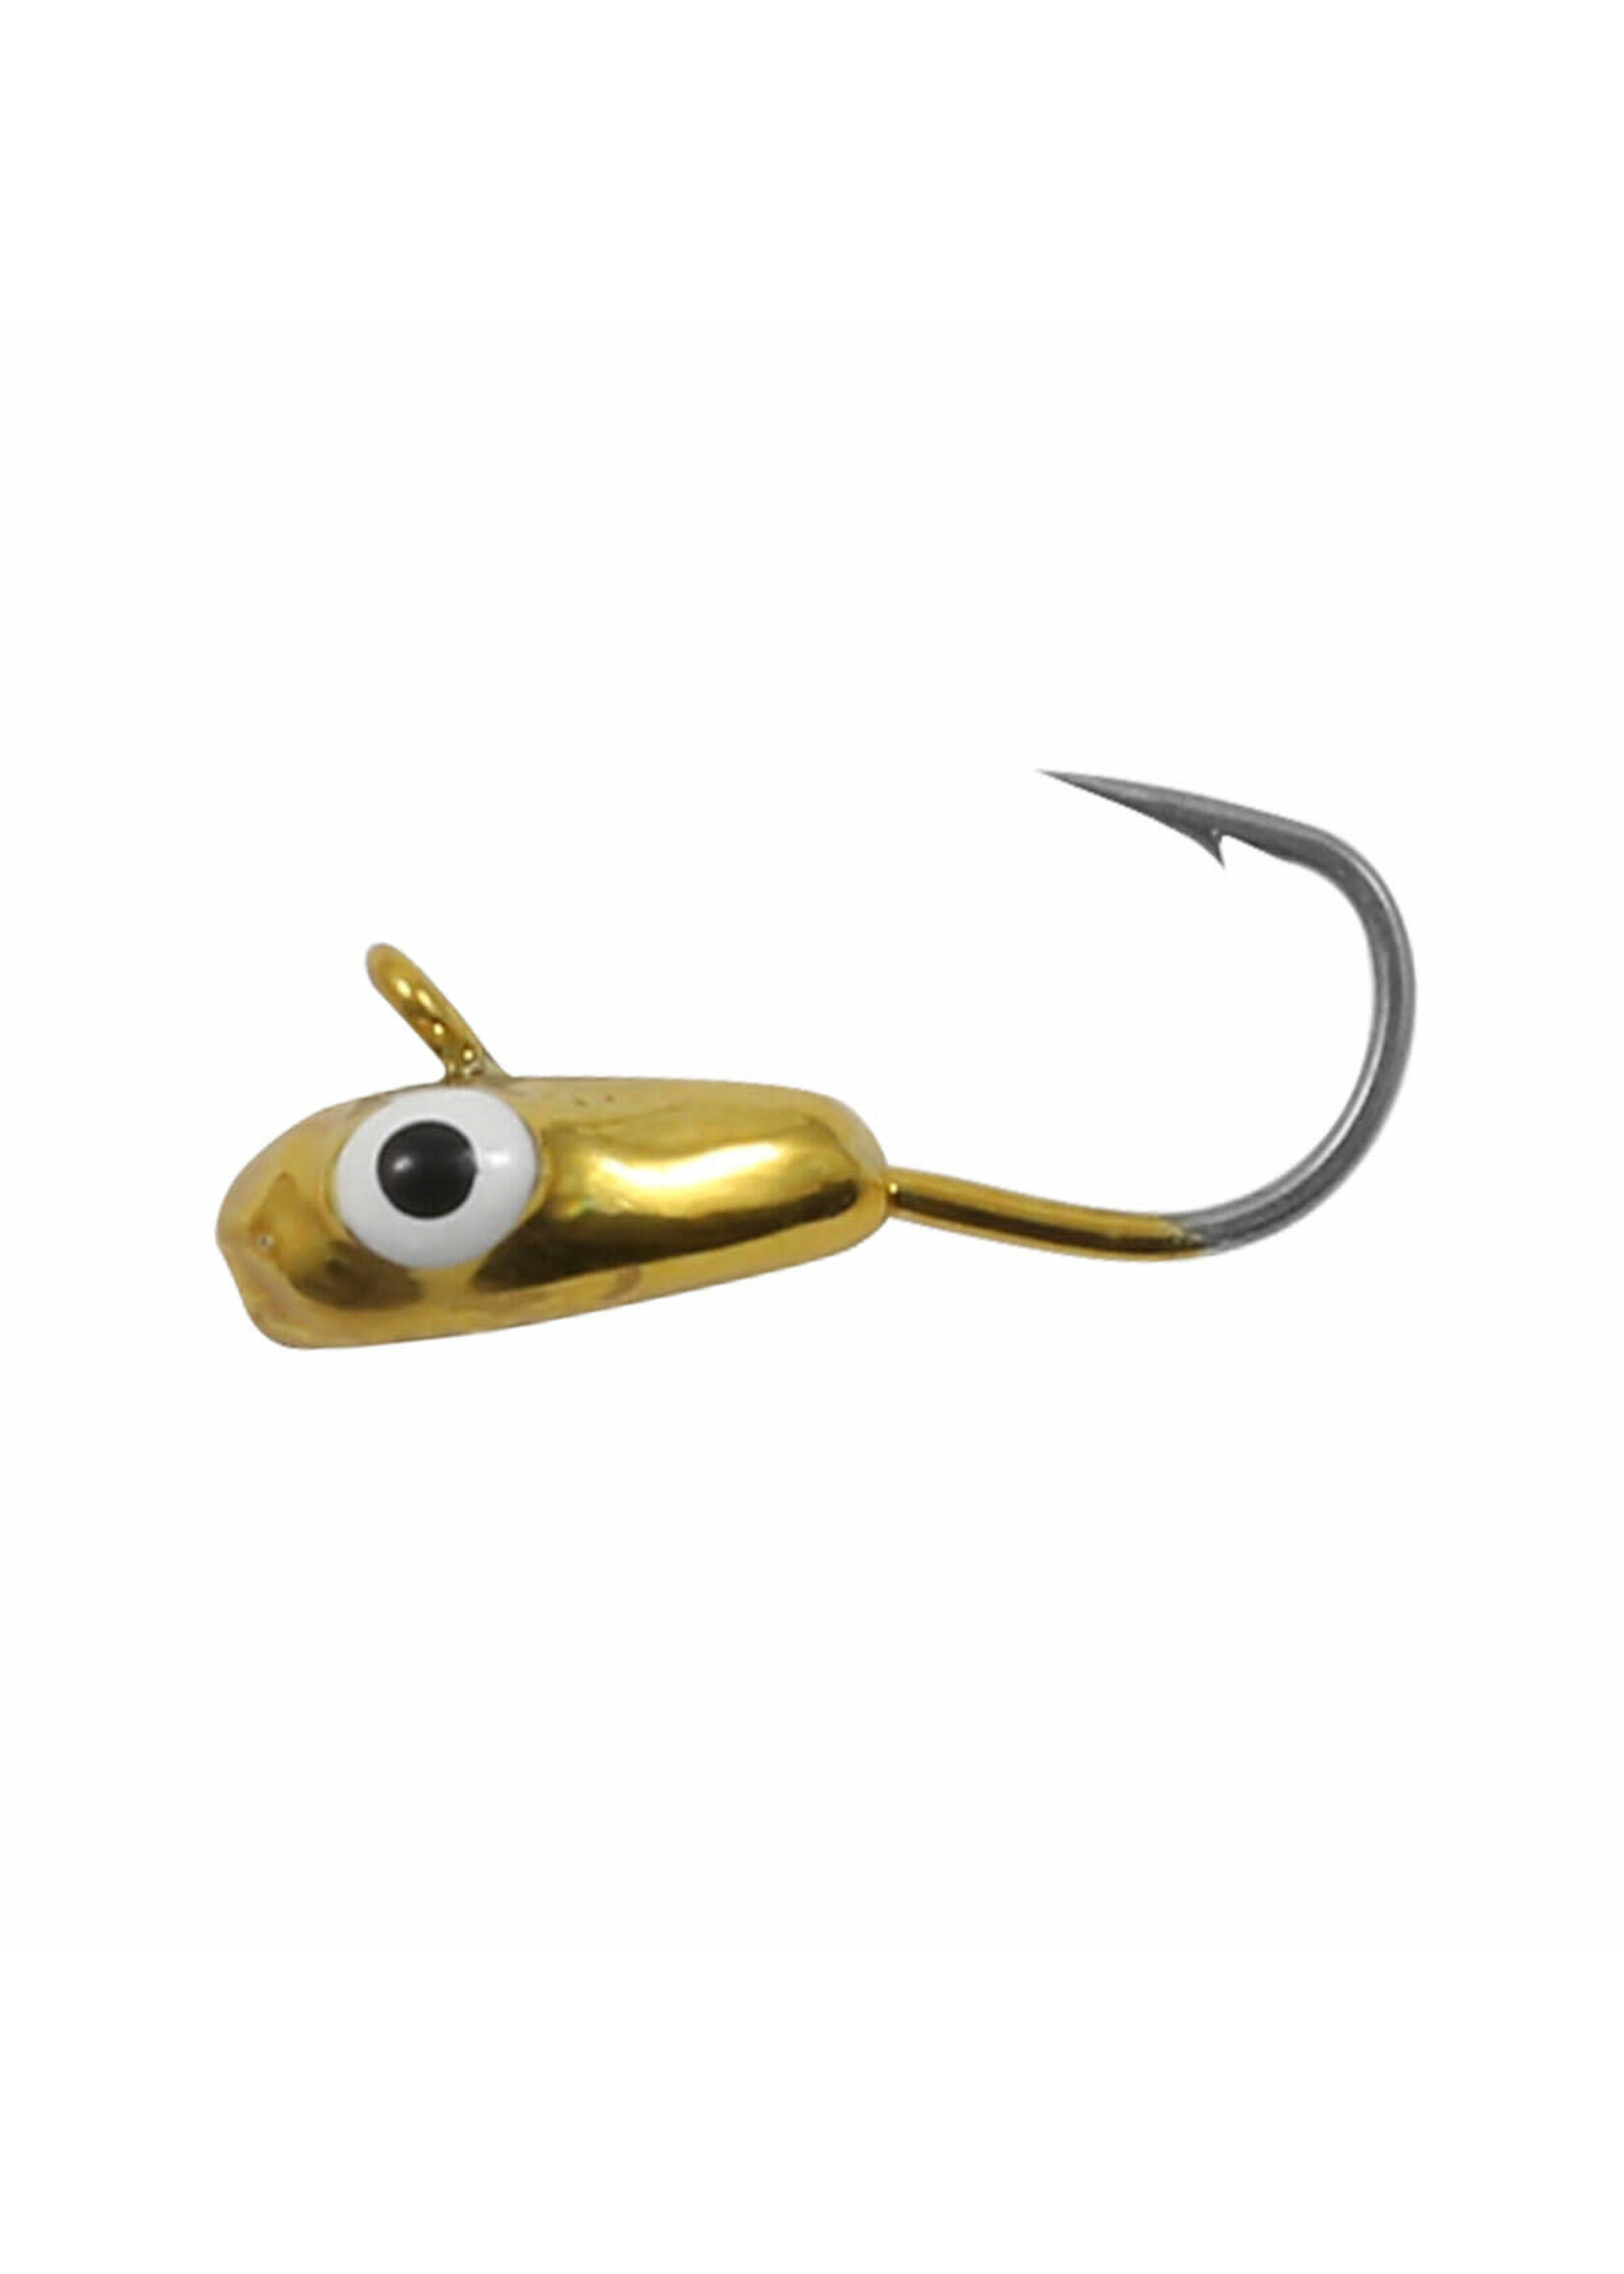 Northland Tackle Tungsten Gill Getter Jigs - Tackle Shack